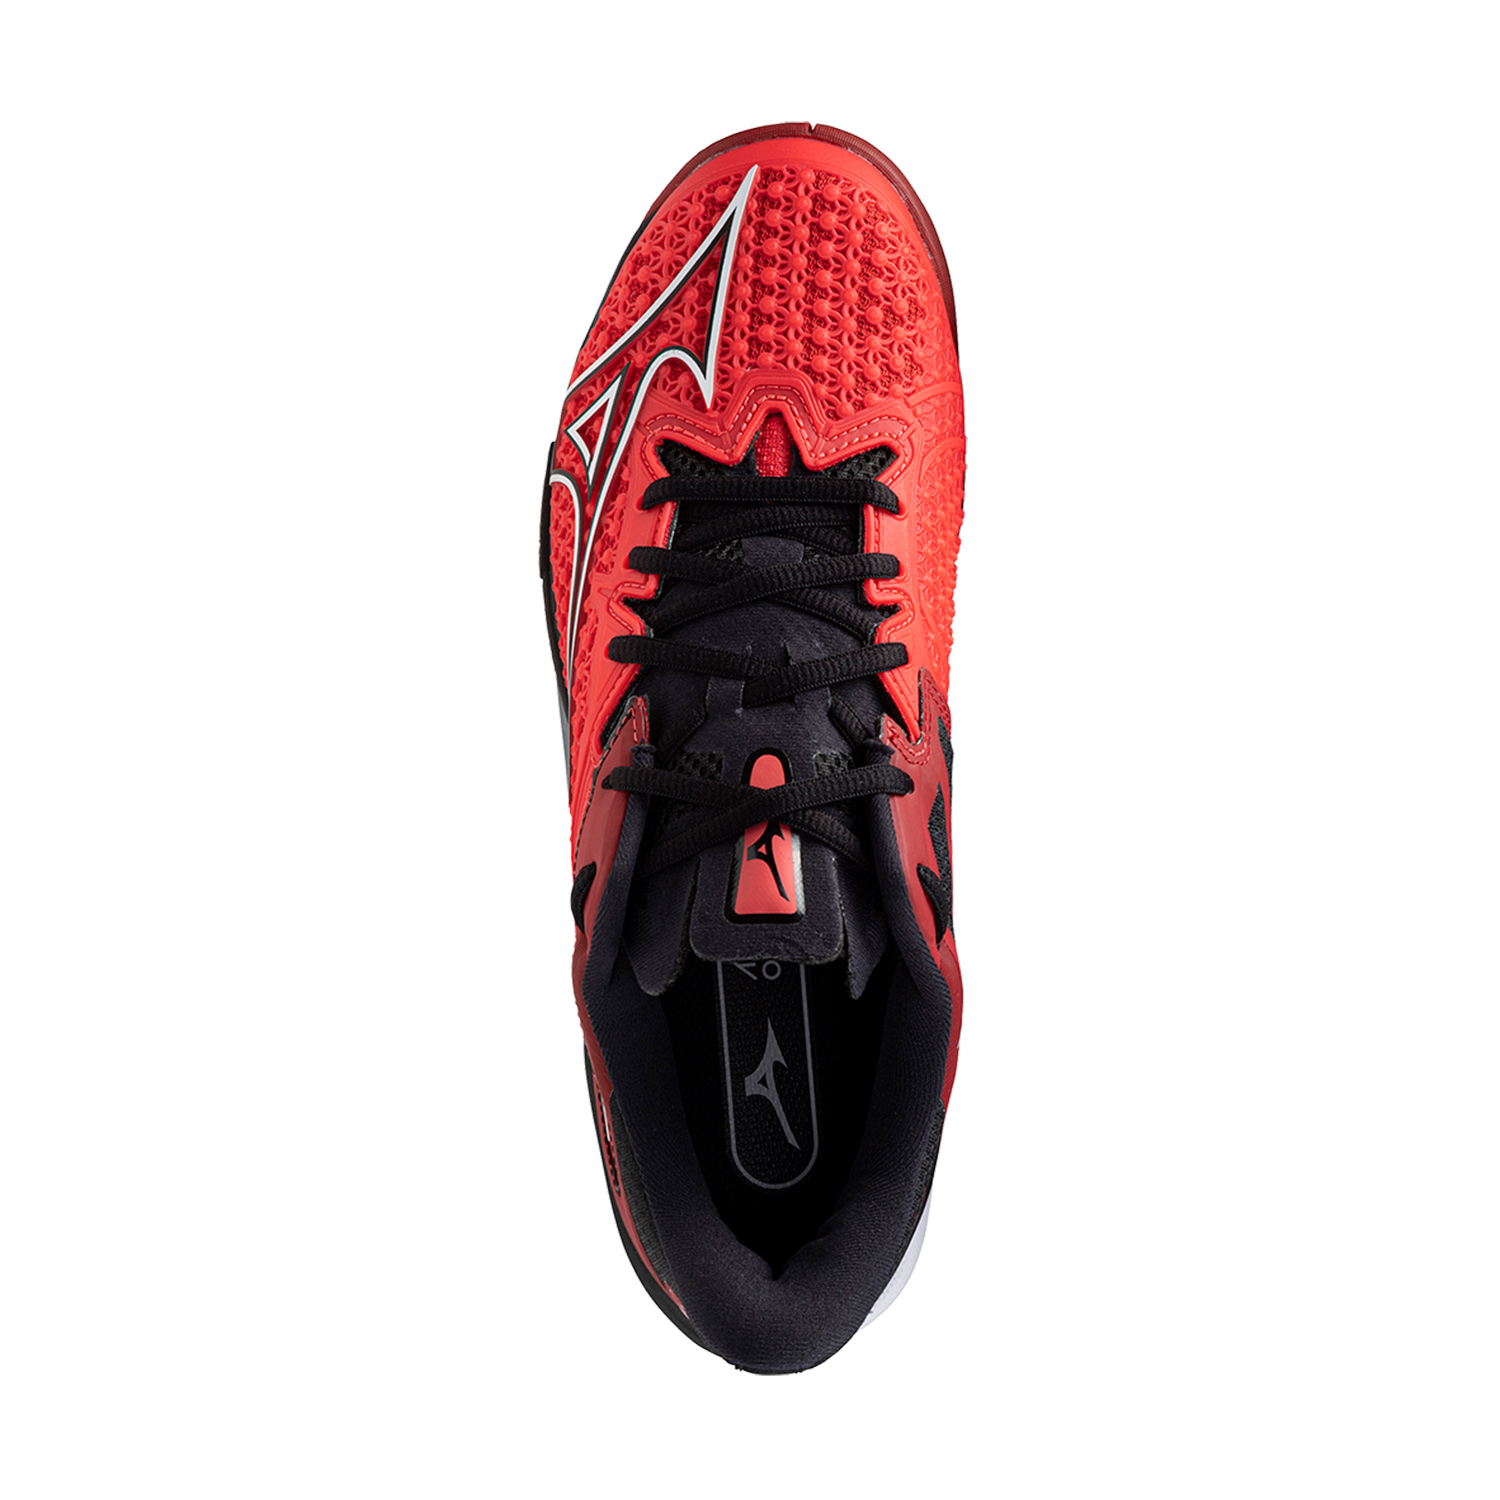 Mizuno Wave Exceed Tour 6 All Court - Radiant Red/White/Black